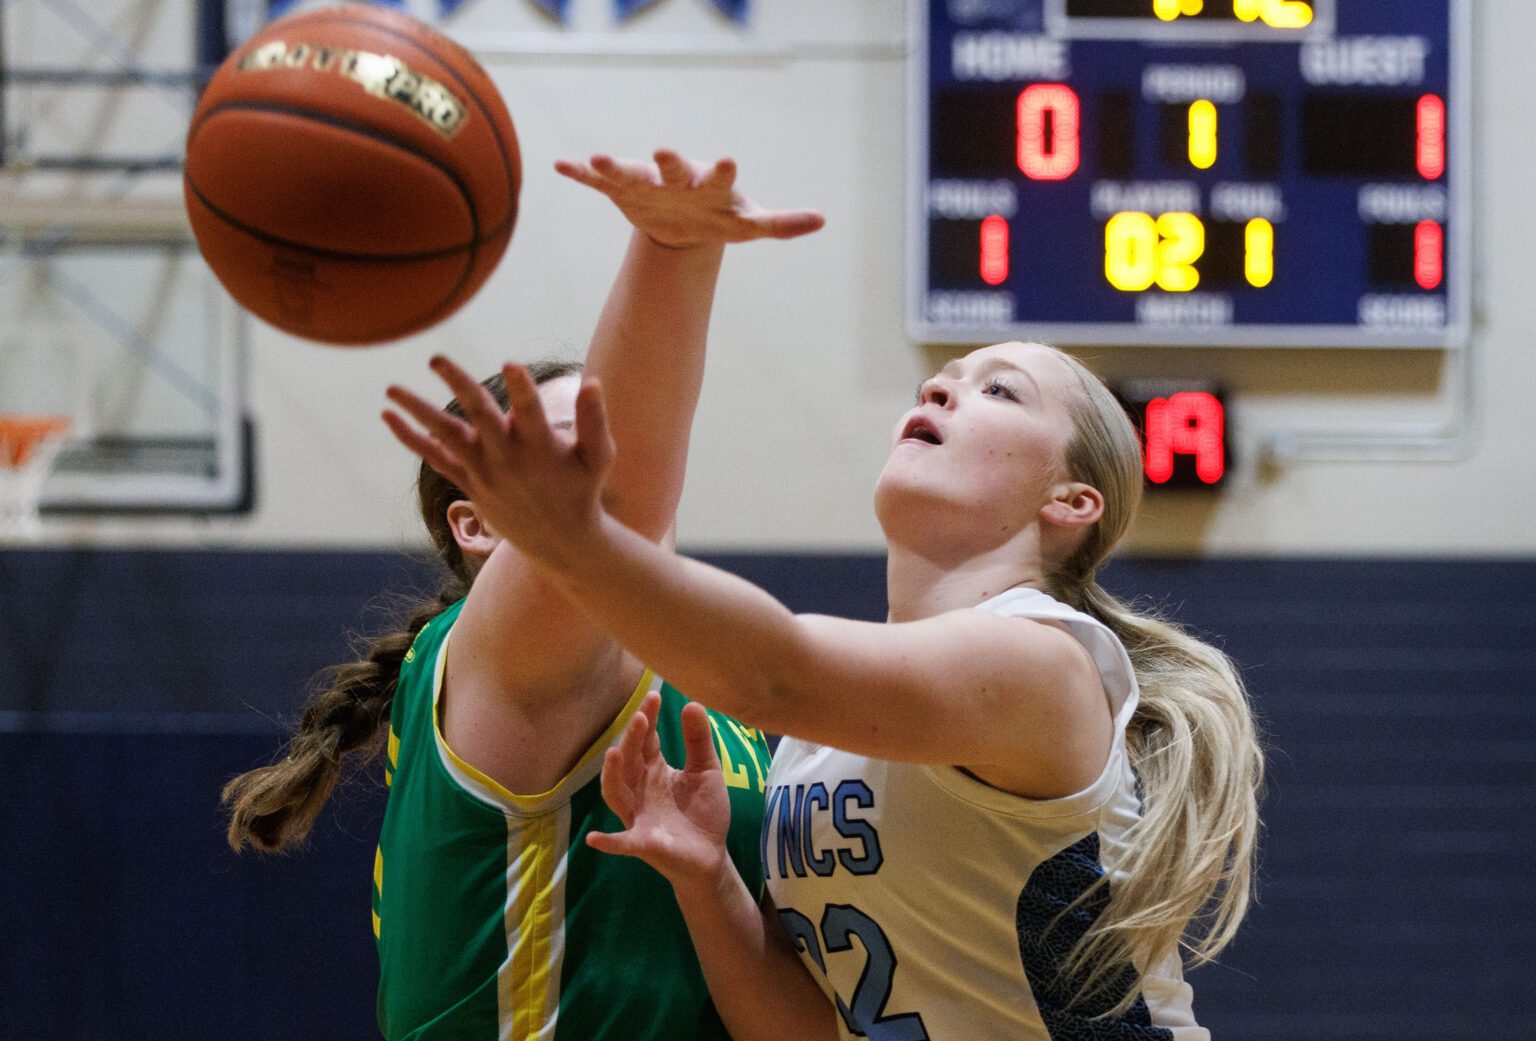 Lynden Christian's Reganne Arnold finger rolls the ball to the basket Feb. 4 as the Lyncs hosted Lynden in an annual rivalry matchup. The Lyncs won 58-50.